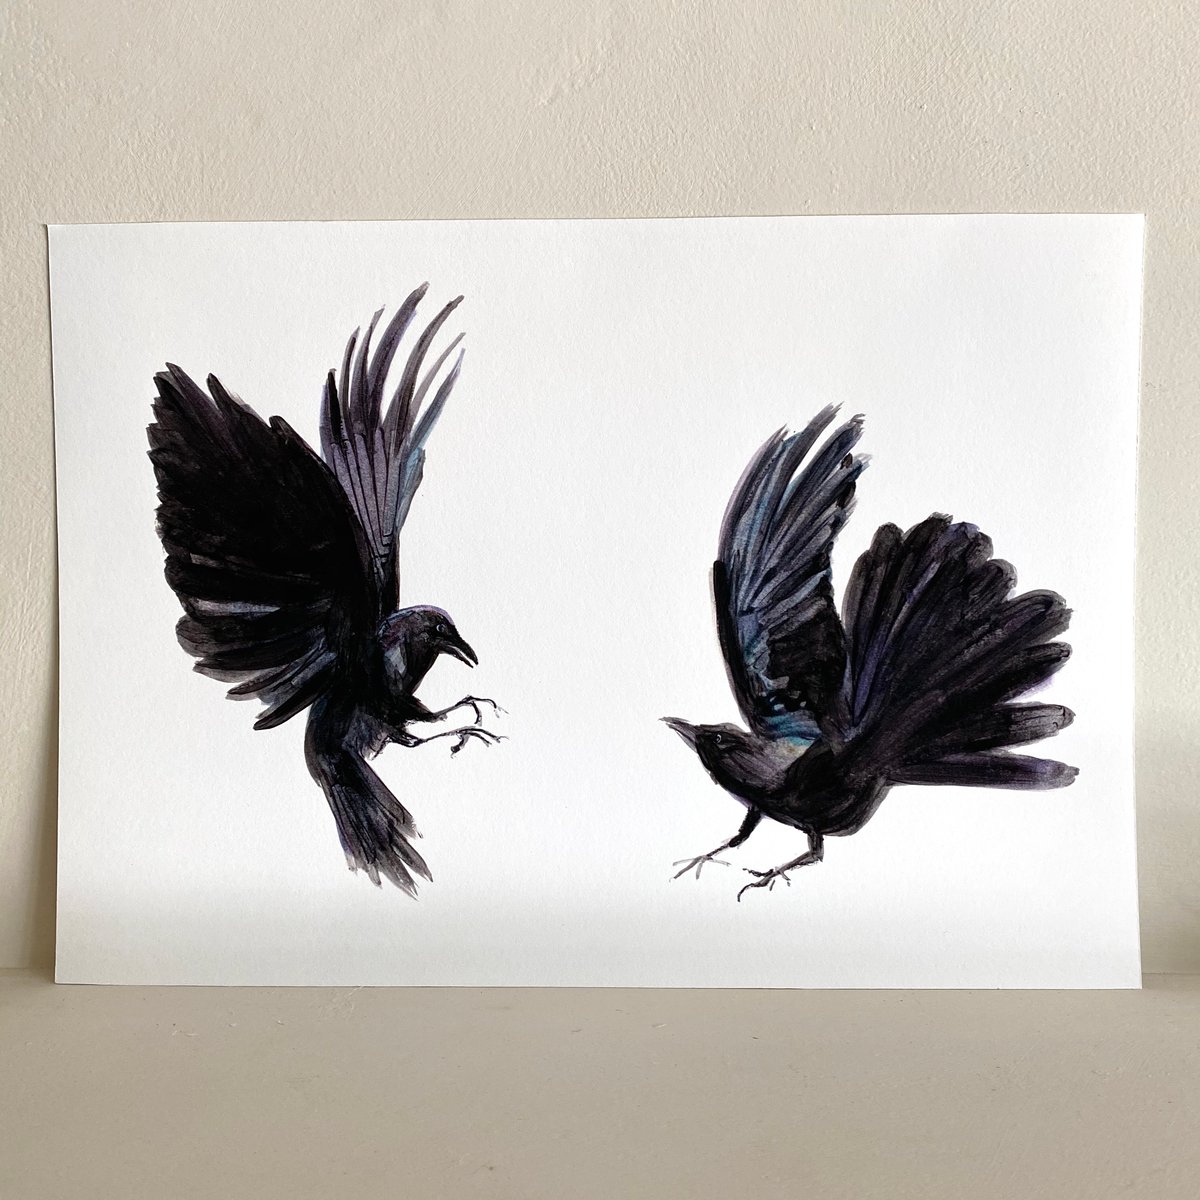 Image of ‘Pair of Crows’ - limited edition Giclee print(s)